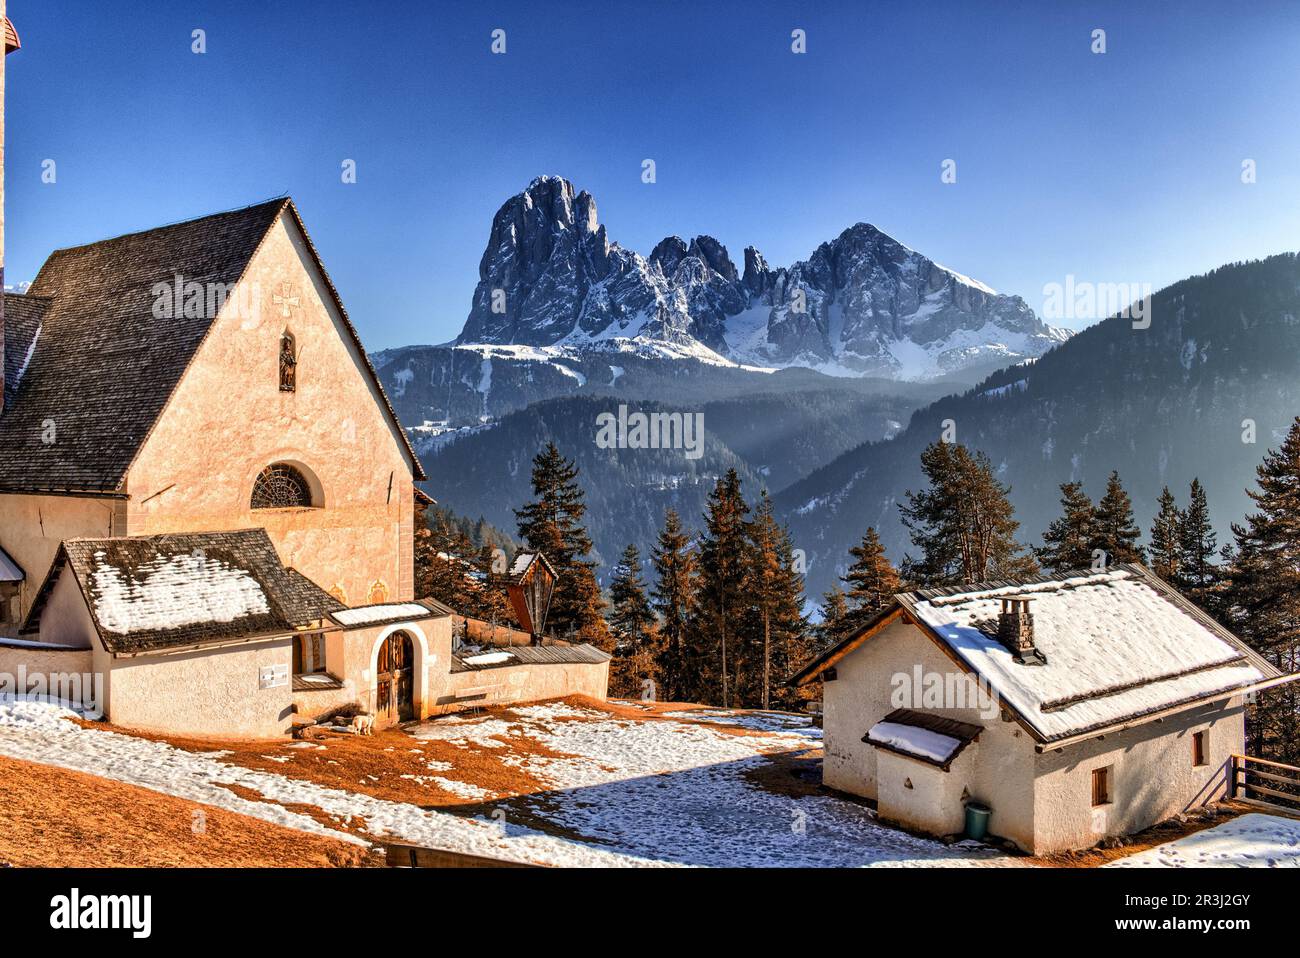 Church of St. Jacob overlooking pine forests and snow-capped peaks in winter Stock Photo